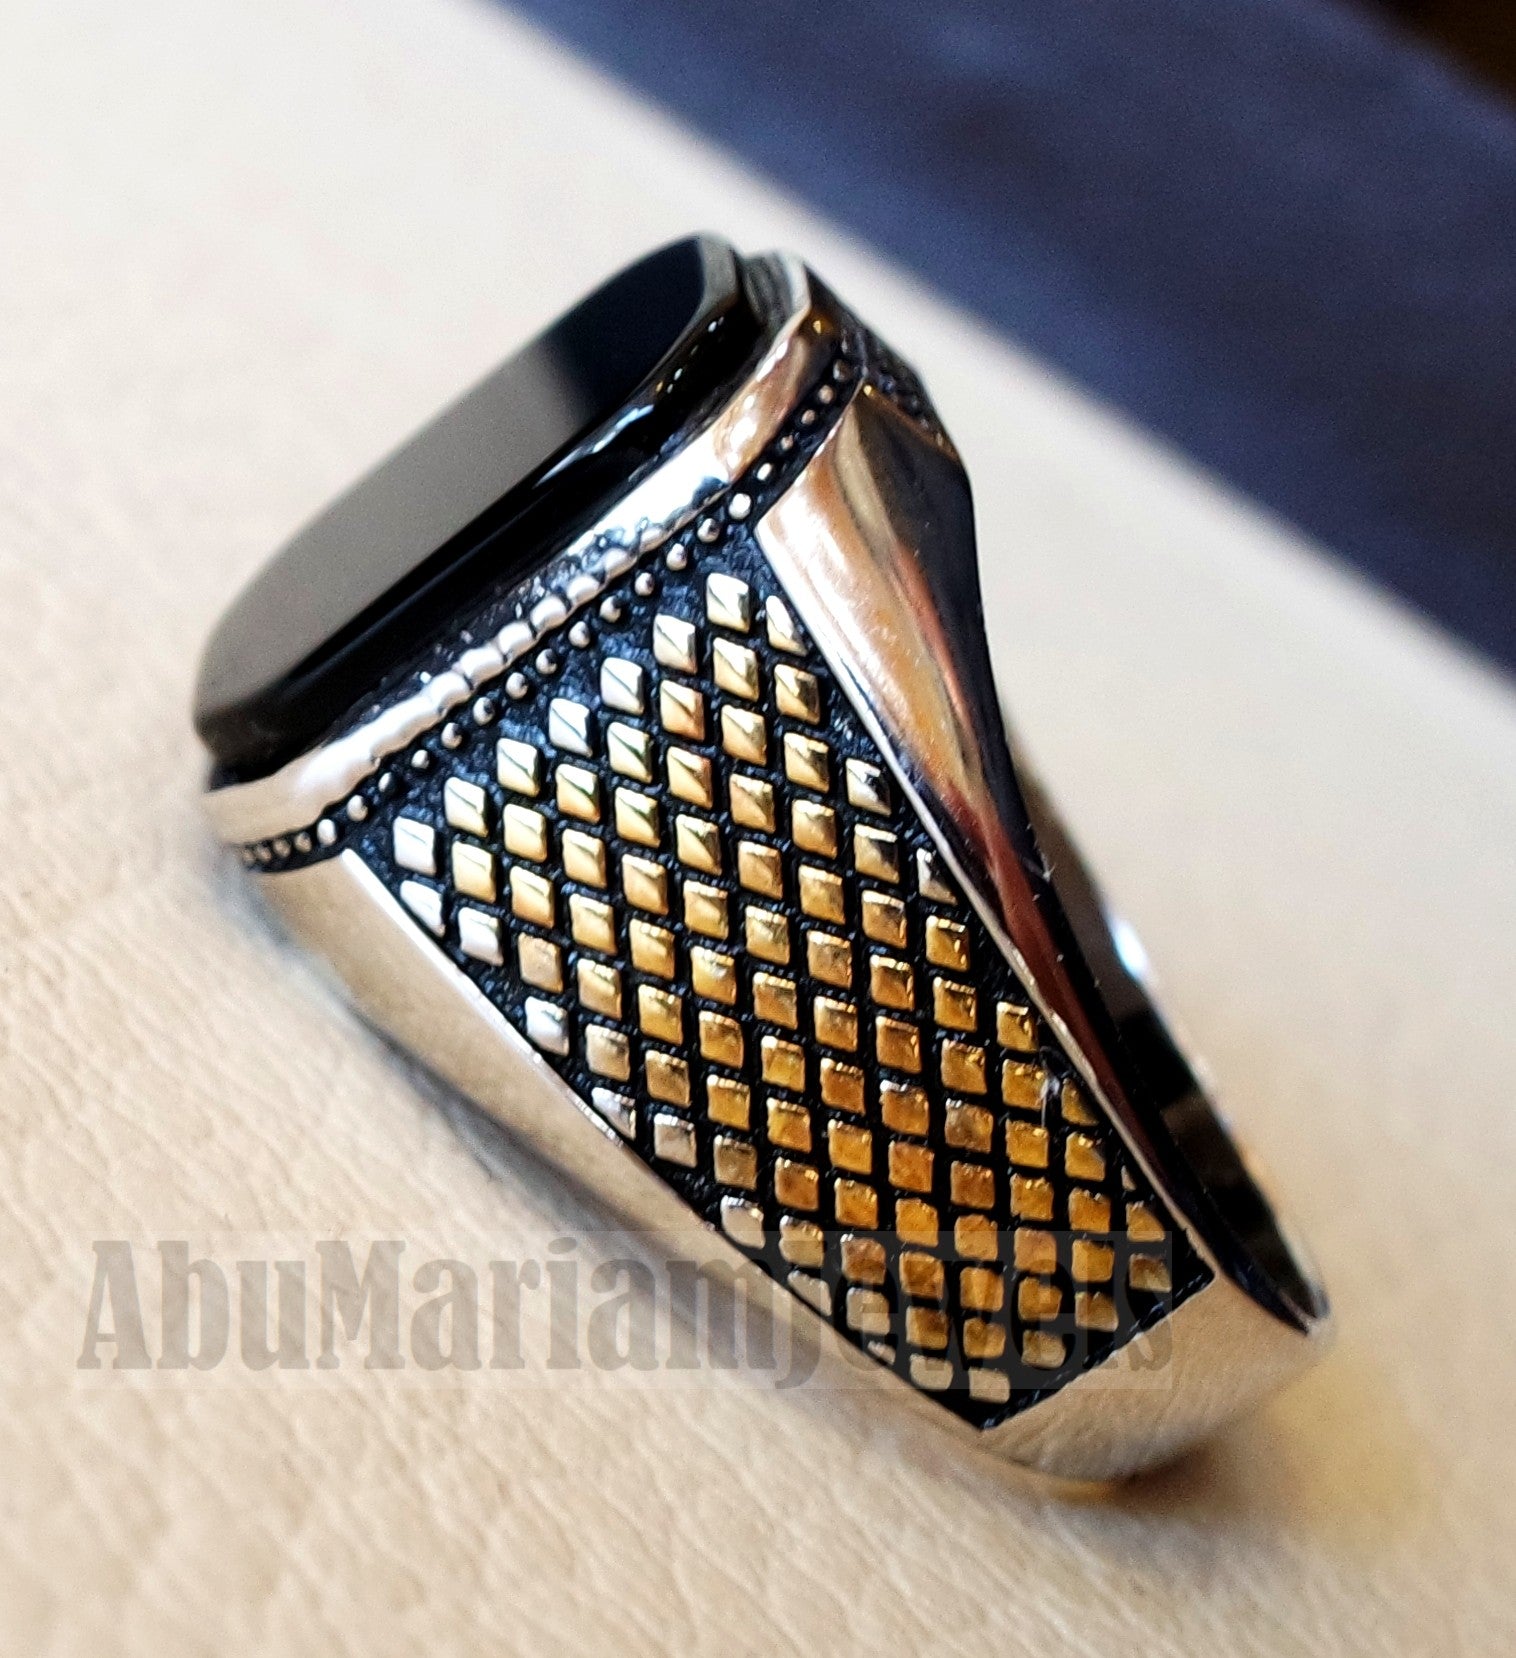 cushion rectangular octagon black onyx agate aqeeq man ring sterling silver 925 and 14k gold plating natural stone gem all sizes jewelry